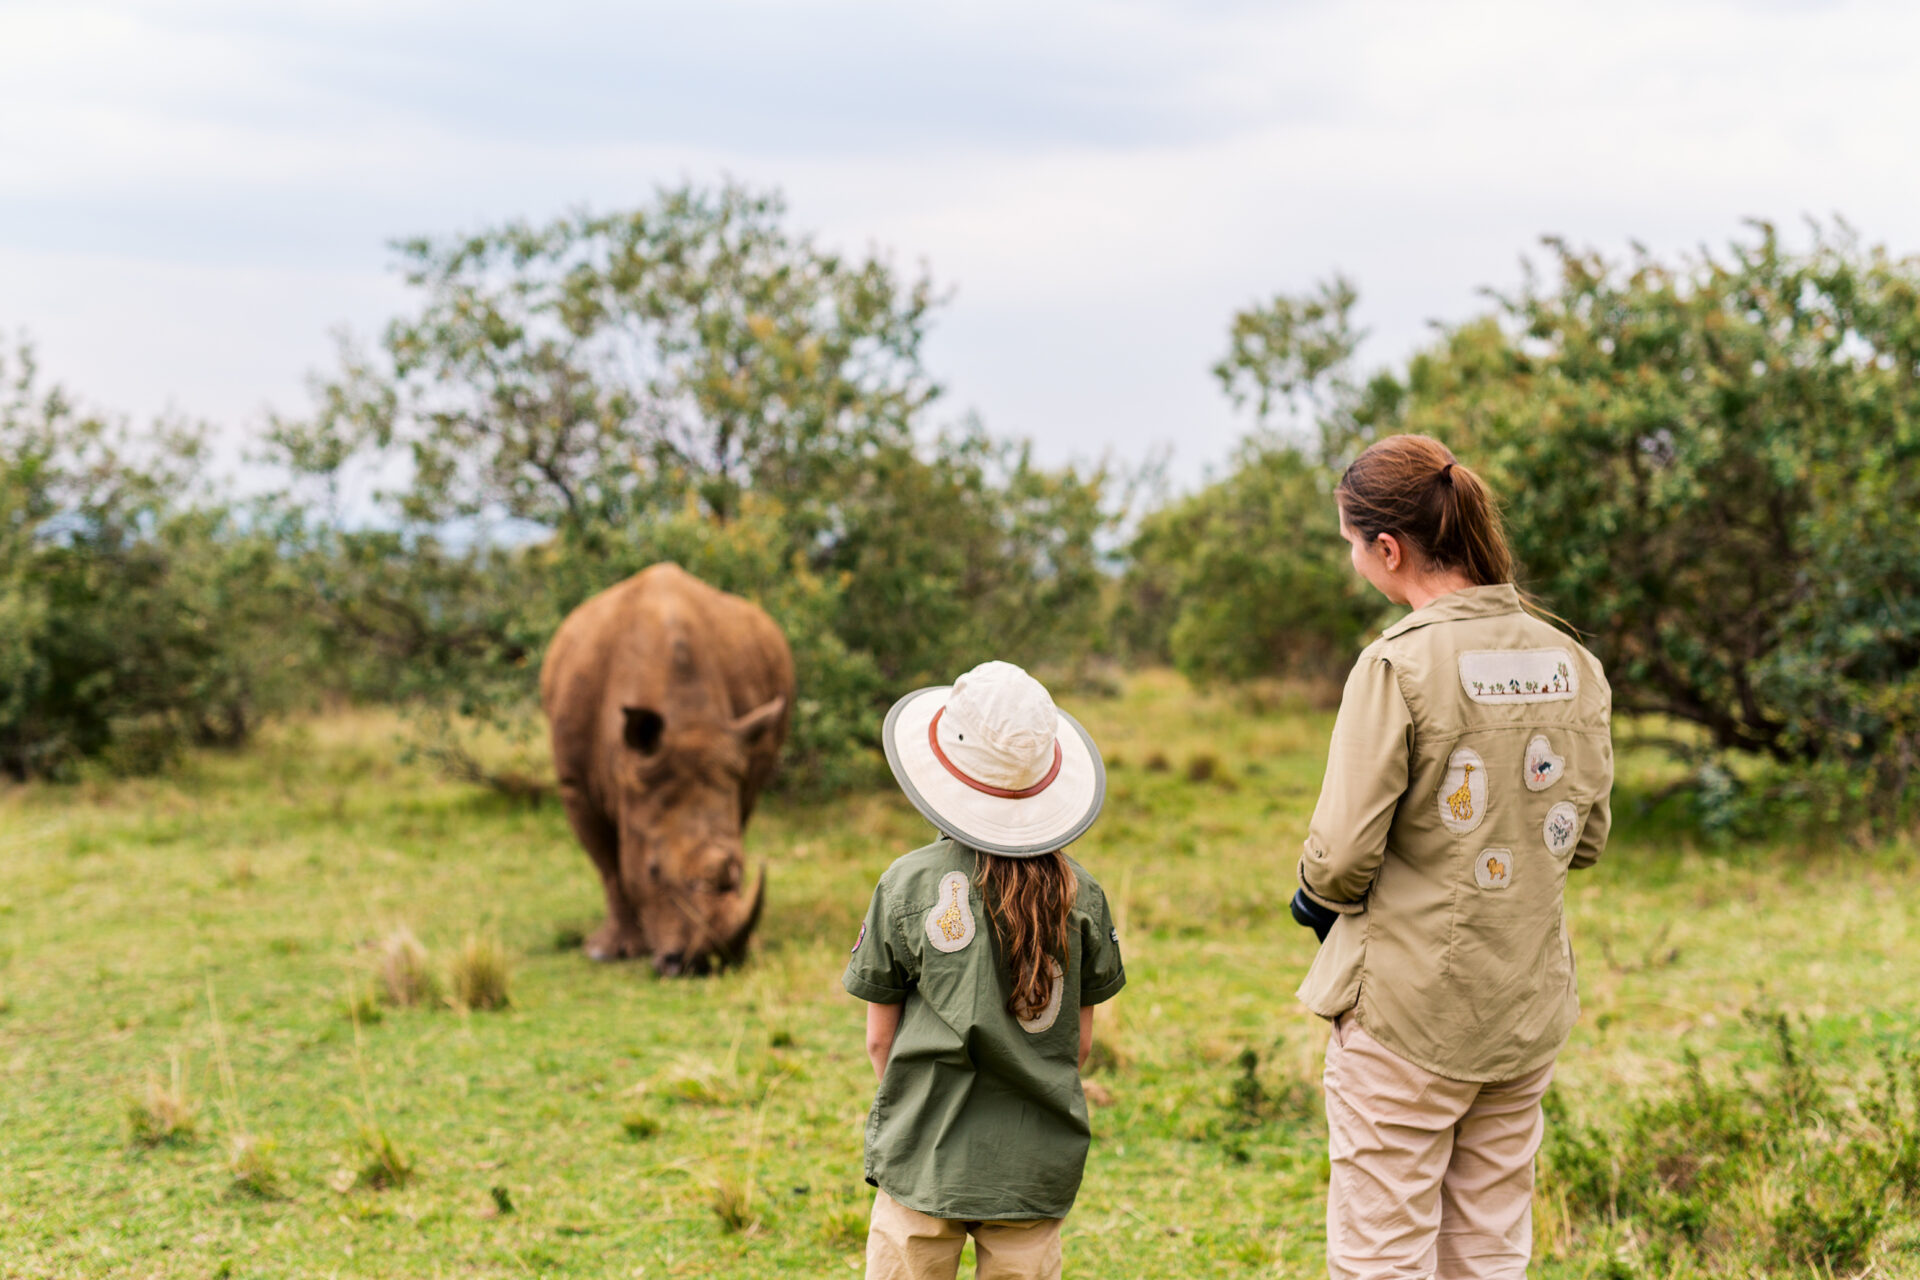 Child alongside expert conservationist - rhino conservation safaris are excellent eco safaris for kids.